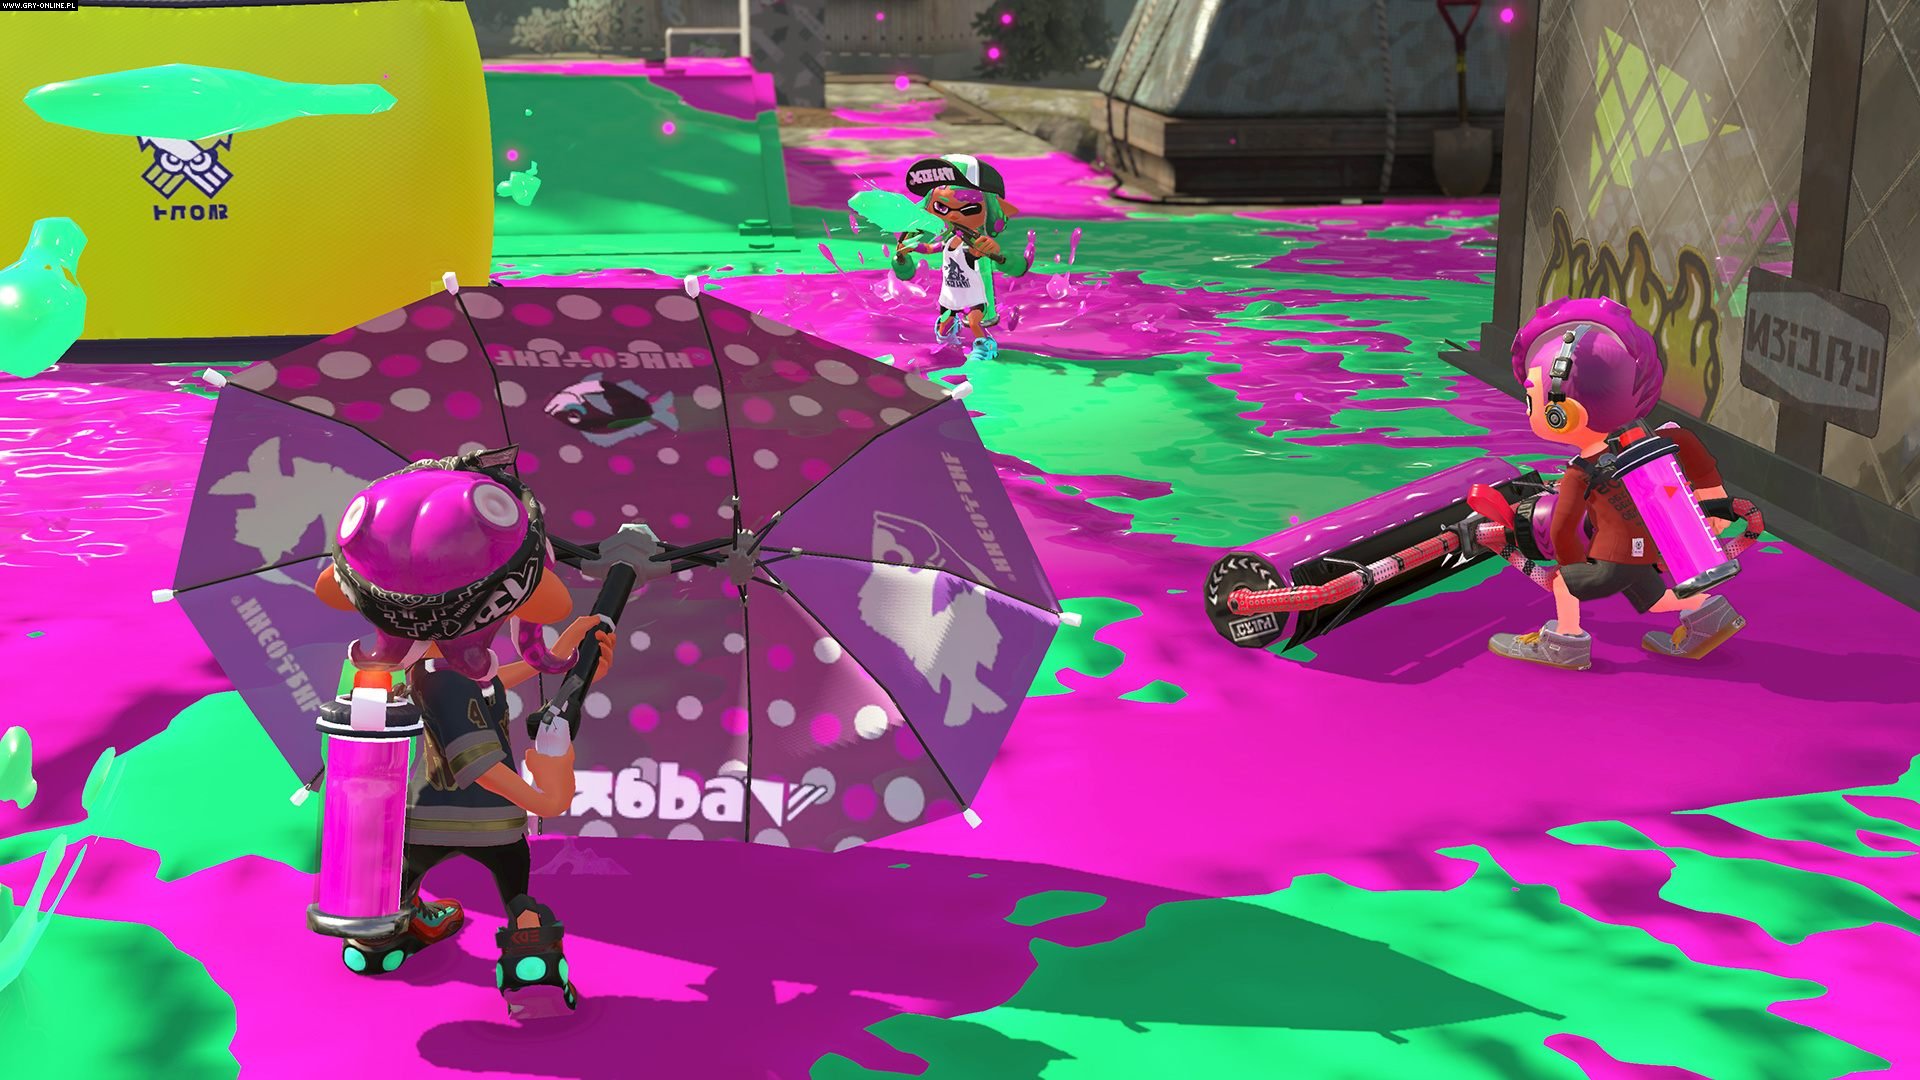 Splat brella protecting an Octoling from an opposing inkling.